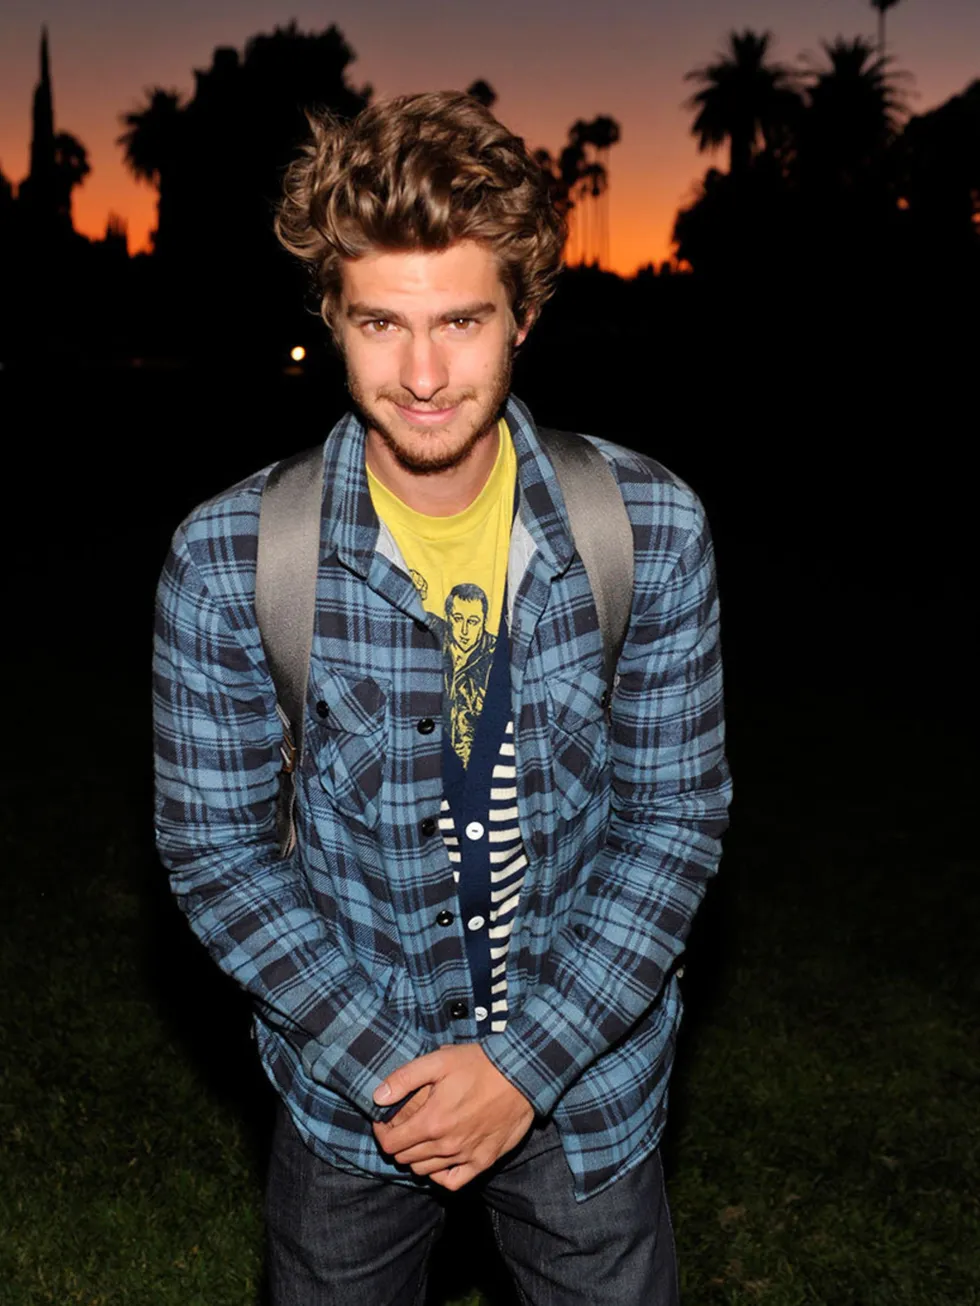 Andrew Garfield with a school bag on.